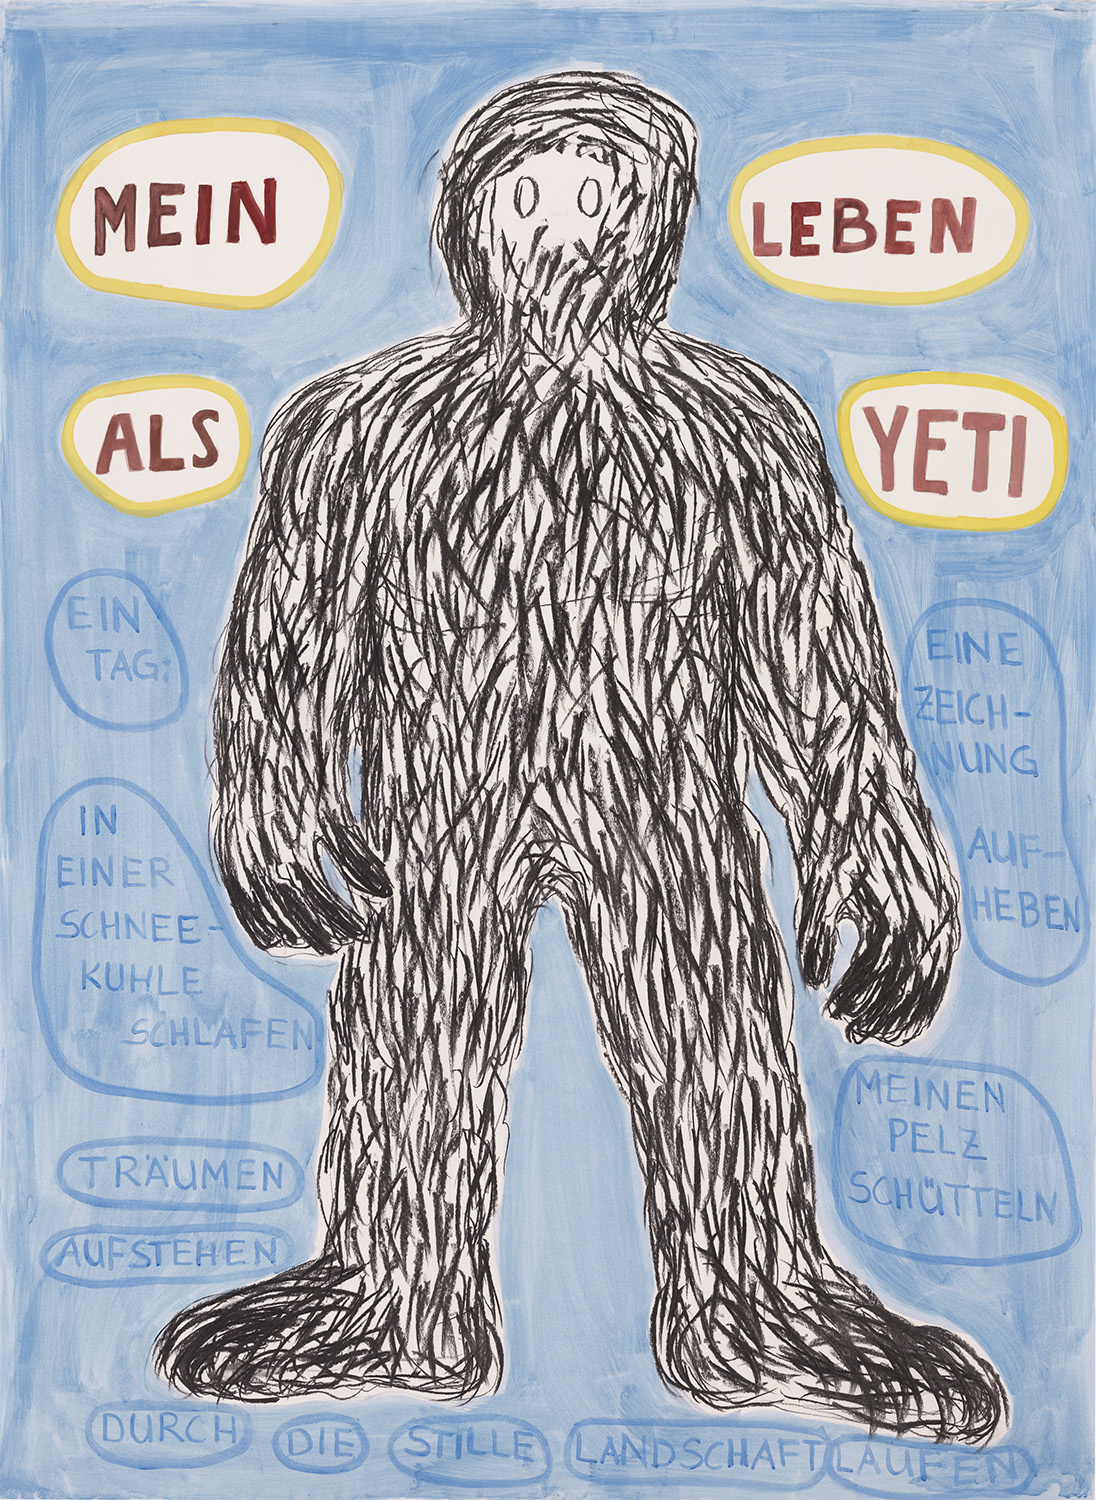 drawing acrylic on paper 'Yeti' Angelika Hasse 2020 image and text